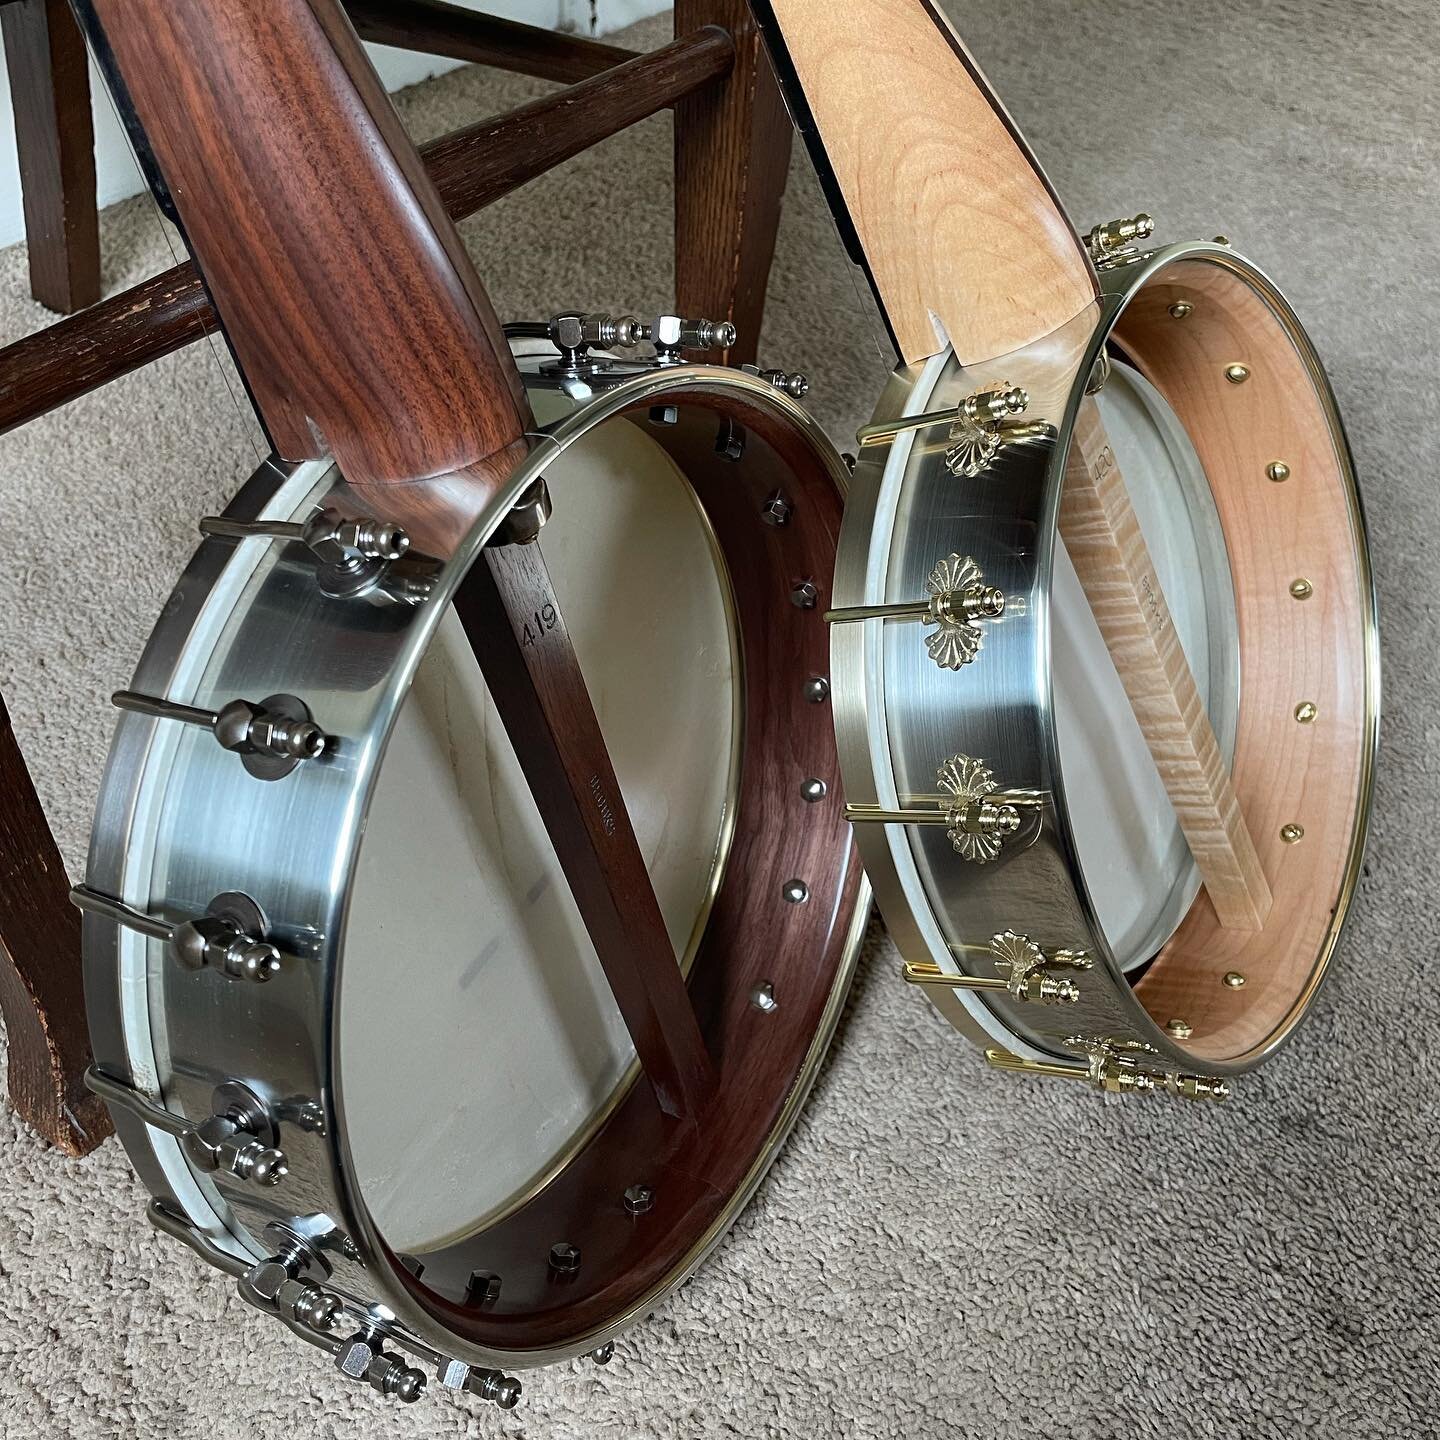 2 down, 3 to go in this batch. Feels so good to finish banjos again! Well, almost finished. The bridges on these are just used for the initial string up. Once the heads have had string pressure on them for a few days, then I make the actual bridges f